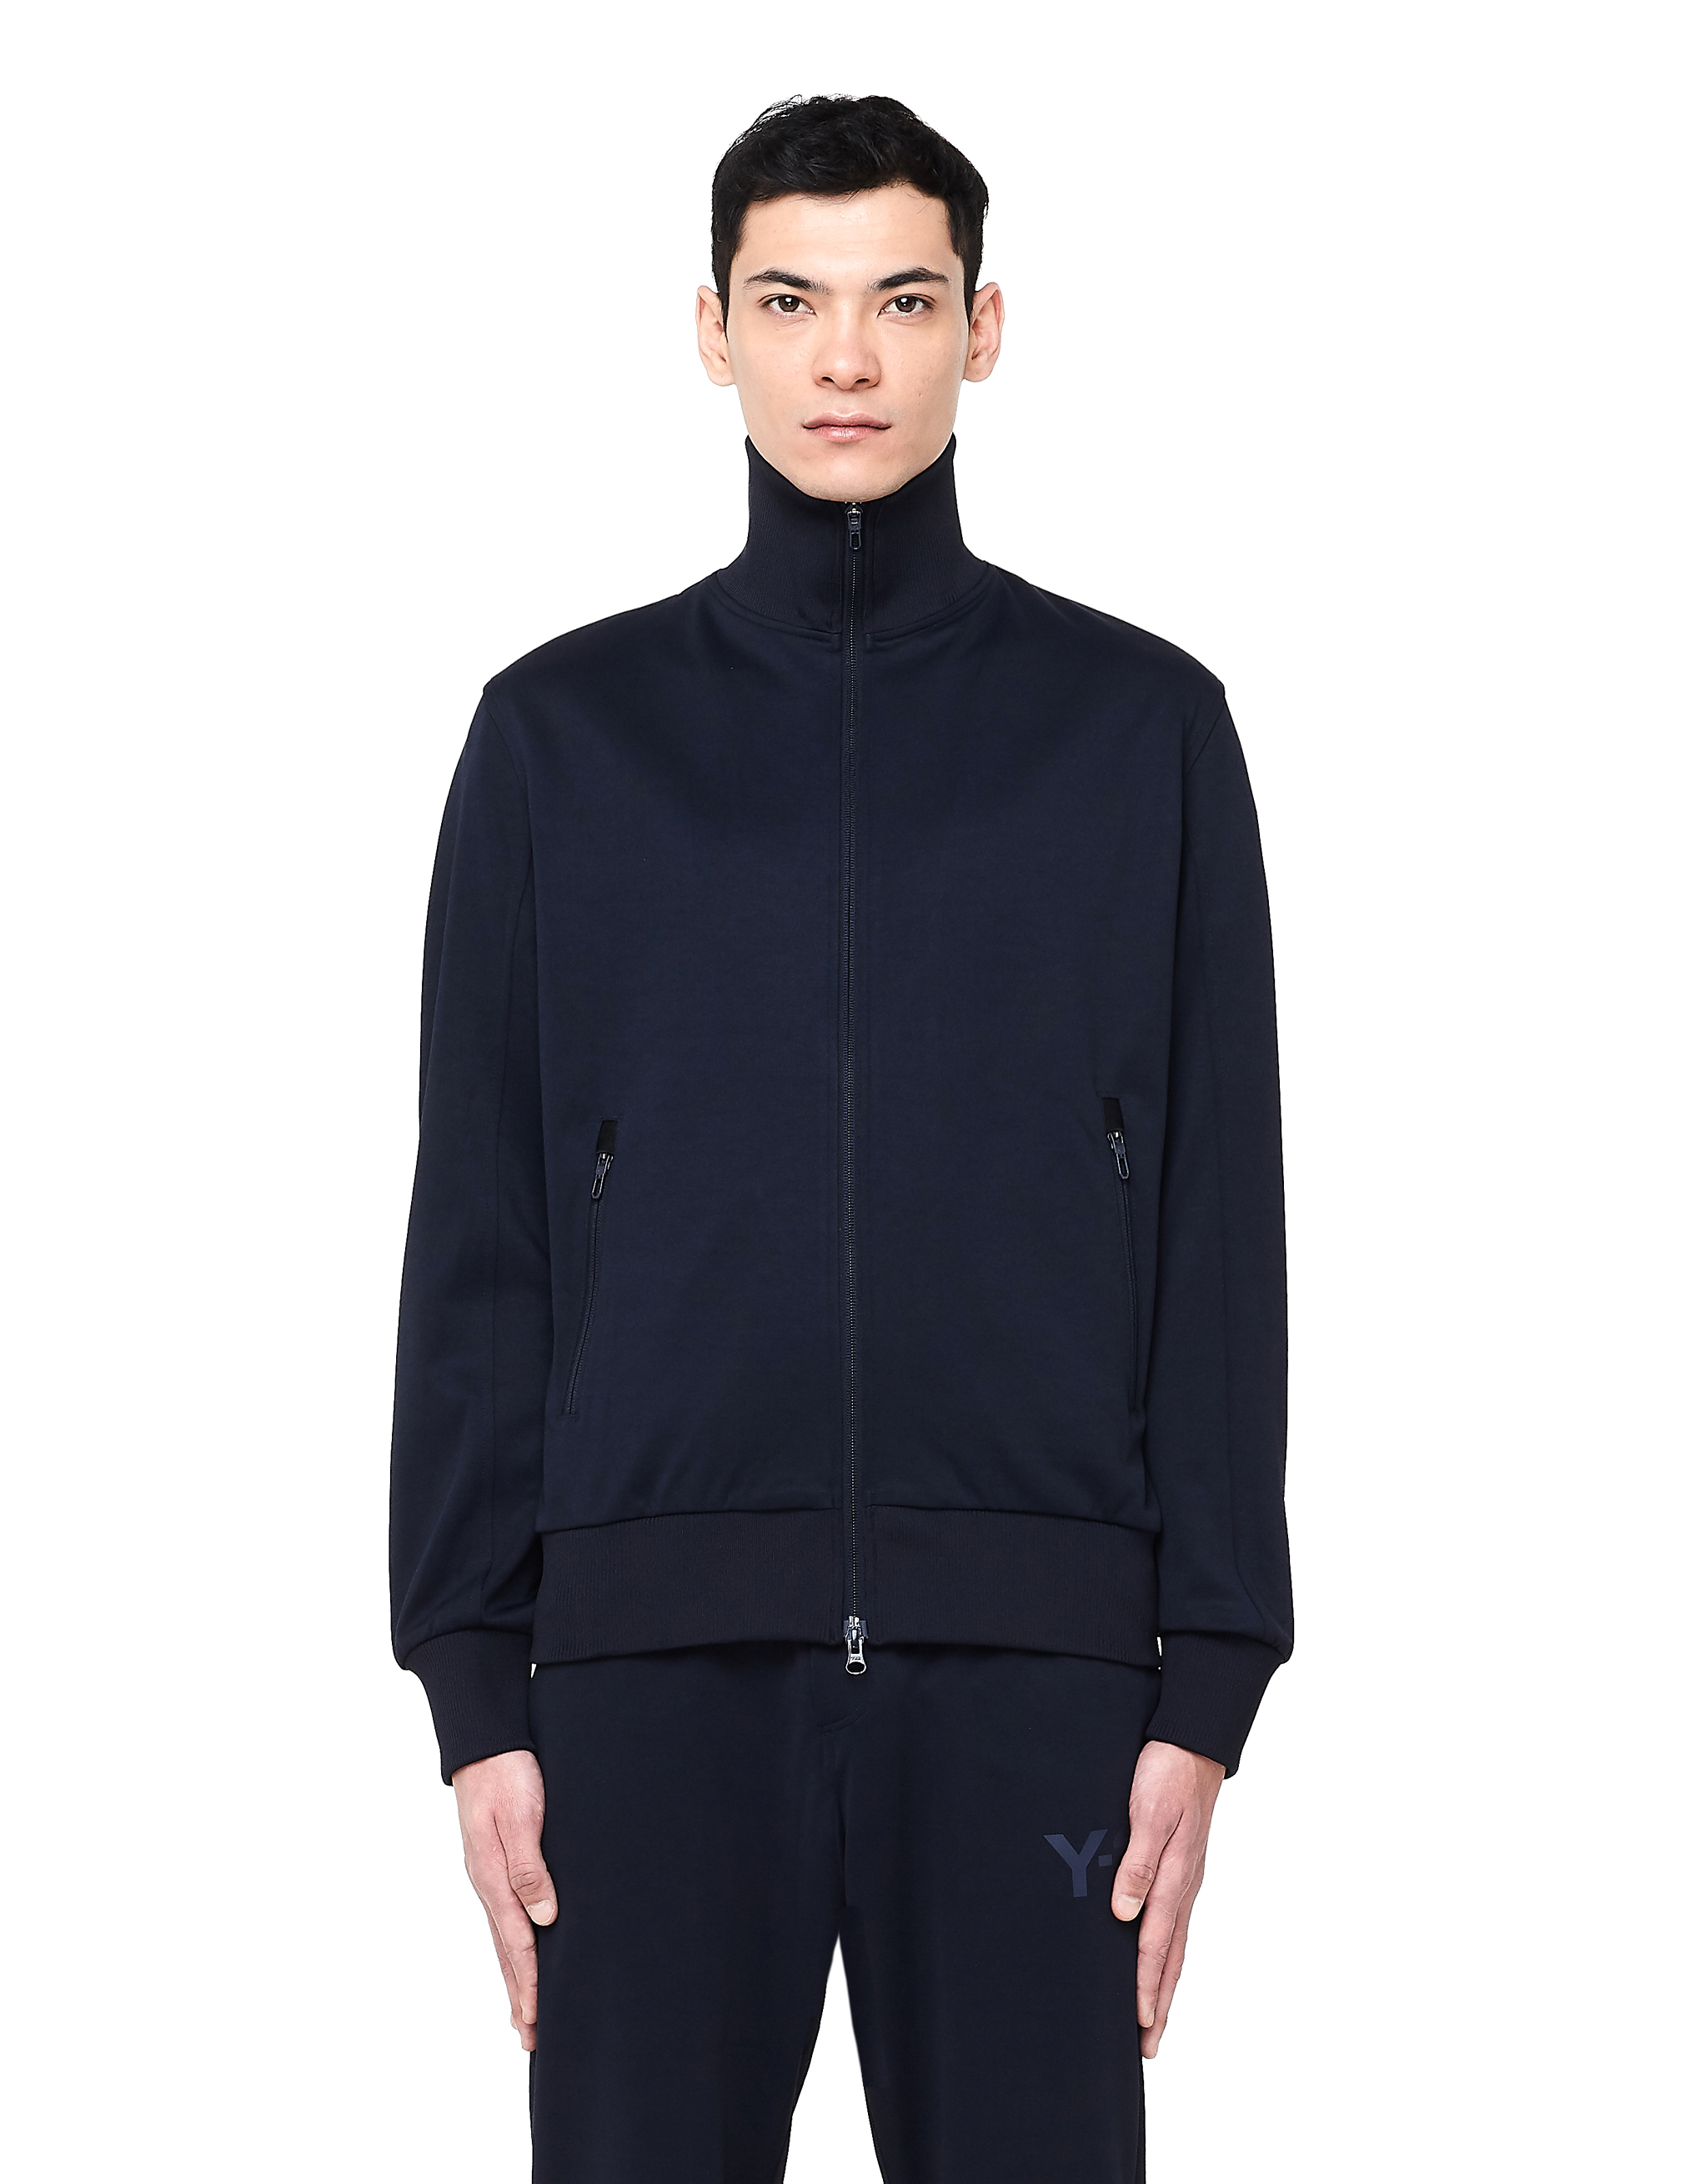 Navy Blue Track Jacket by Y-3 — SVMoscow